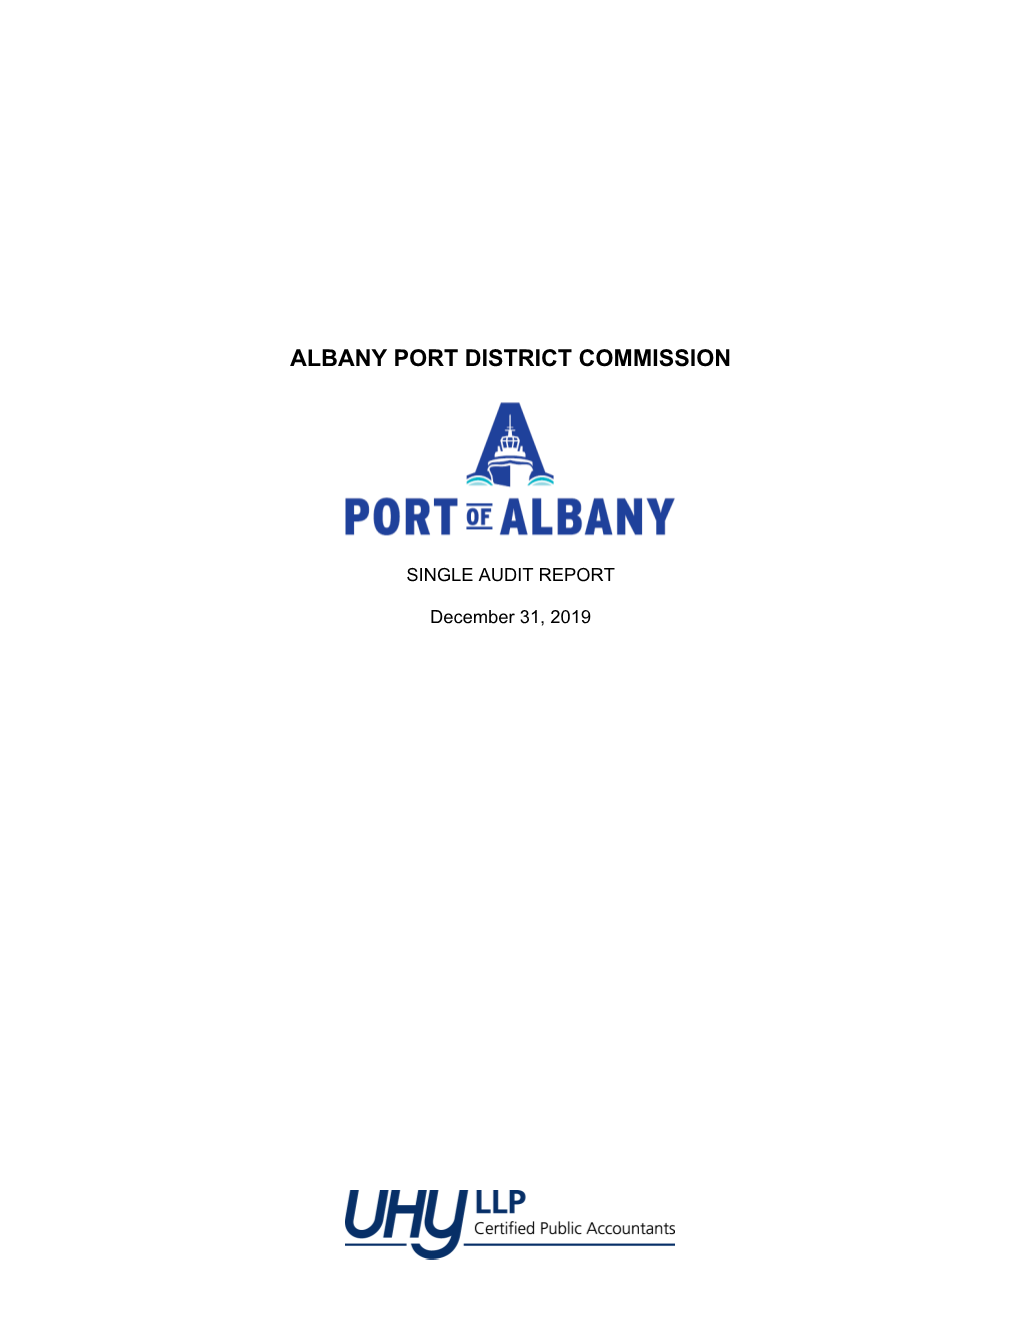 Albany Port District Commission